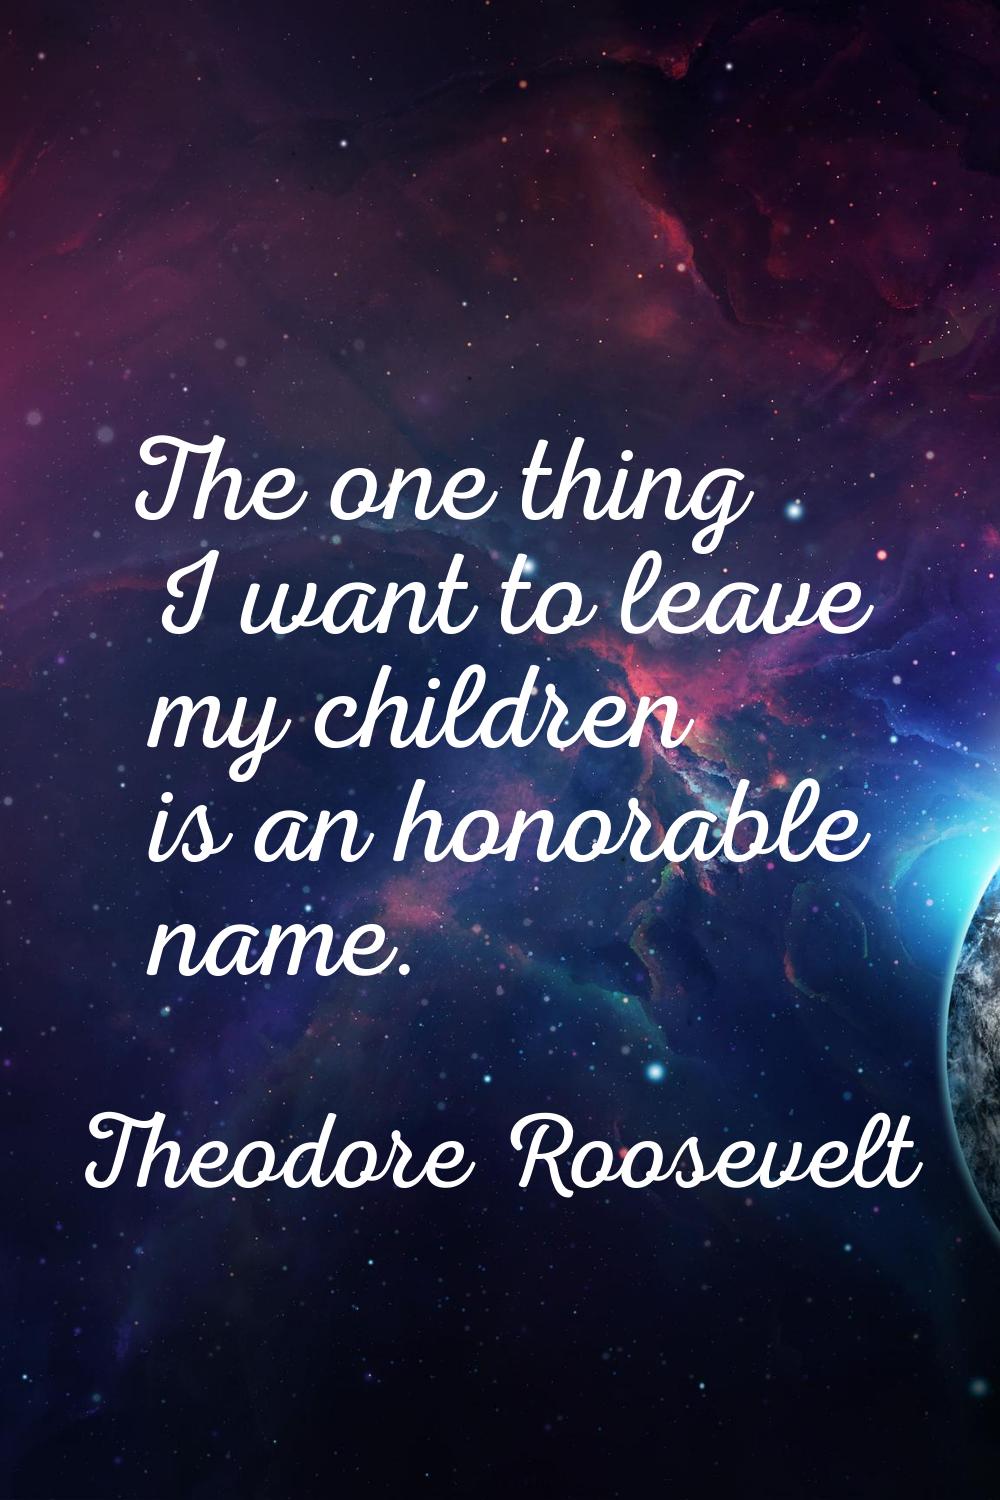 The one thing I want to leave my children is an honorable name.